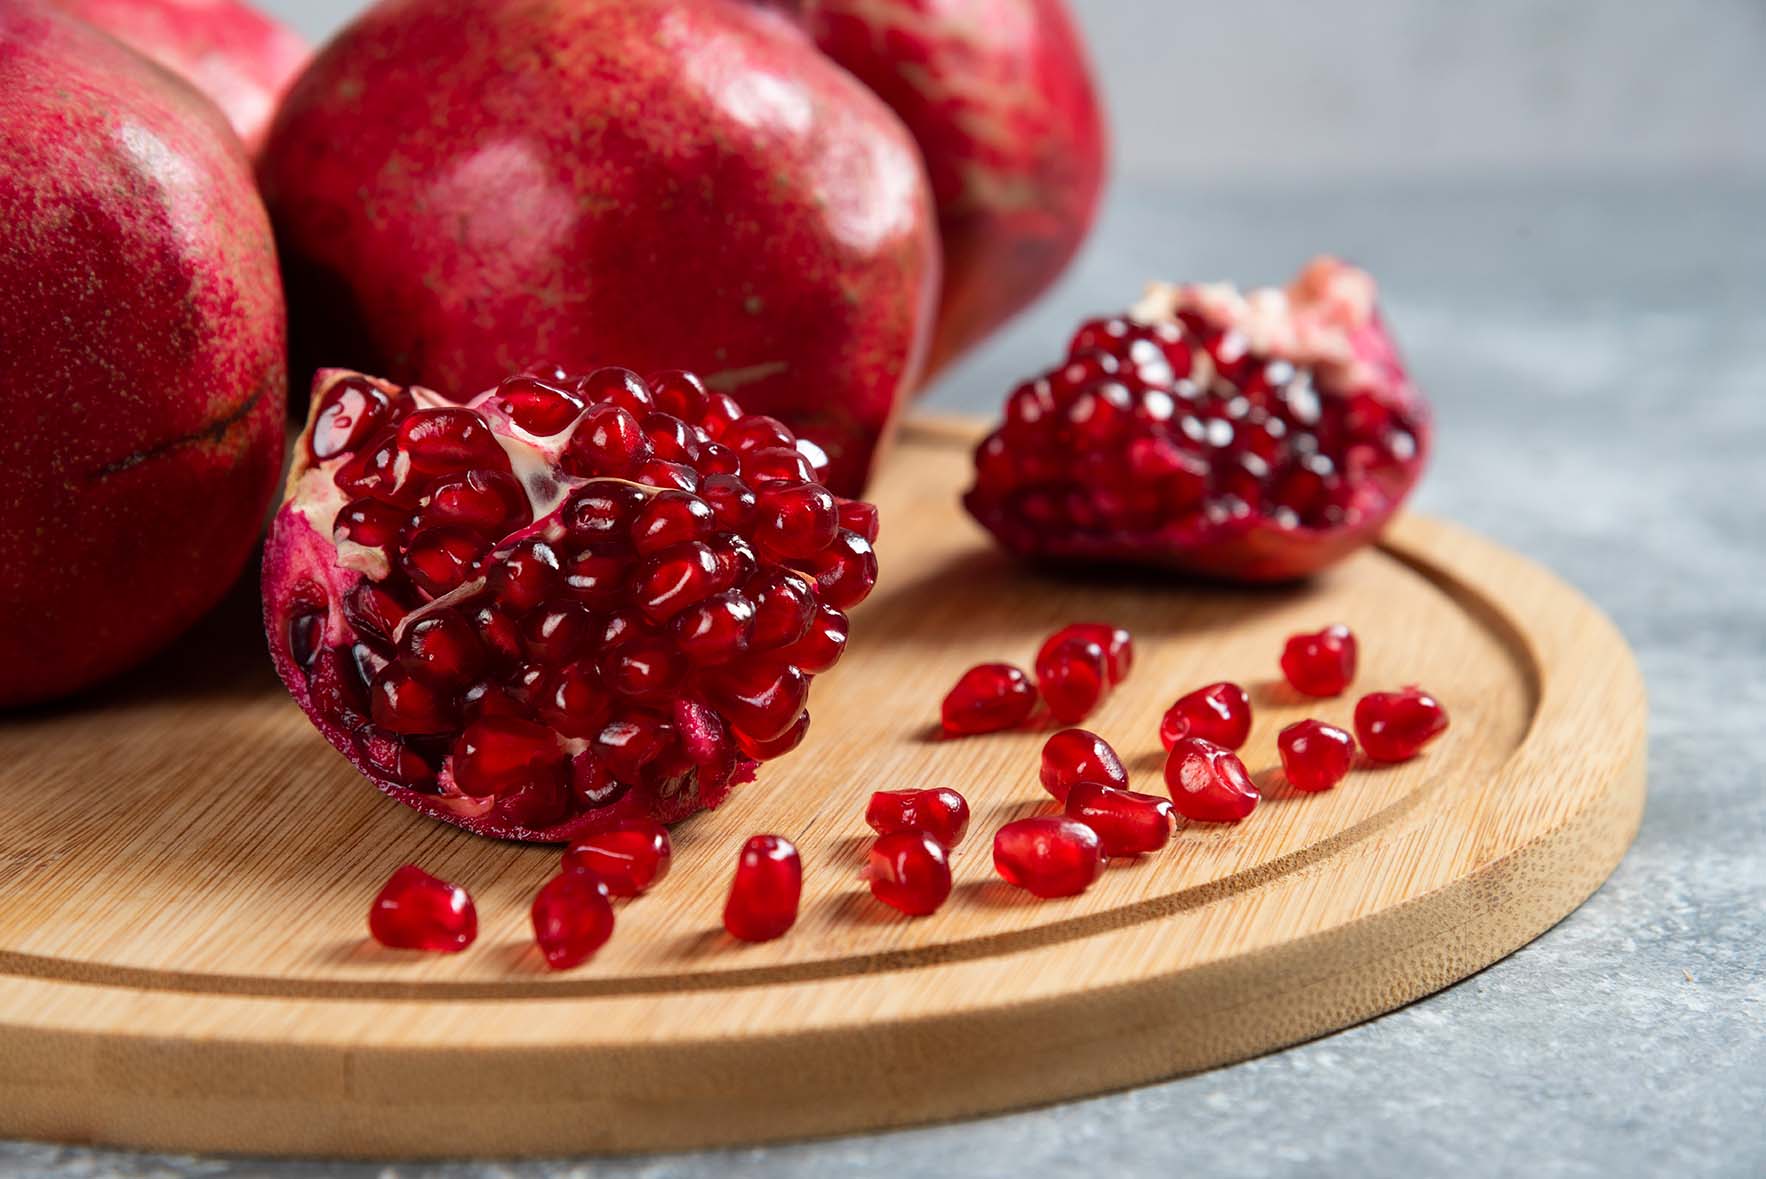 How To Store Pomegranate Seeds In The Fridge